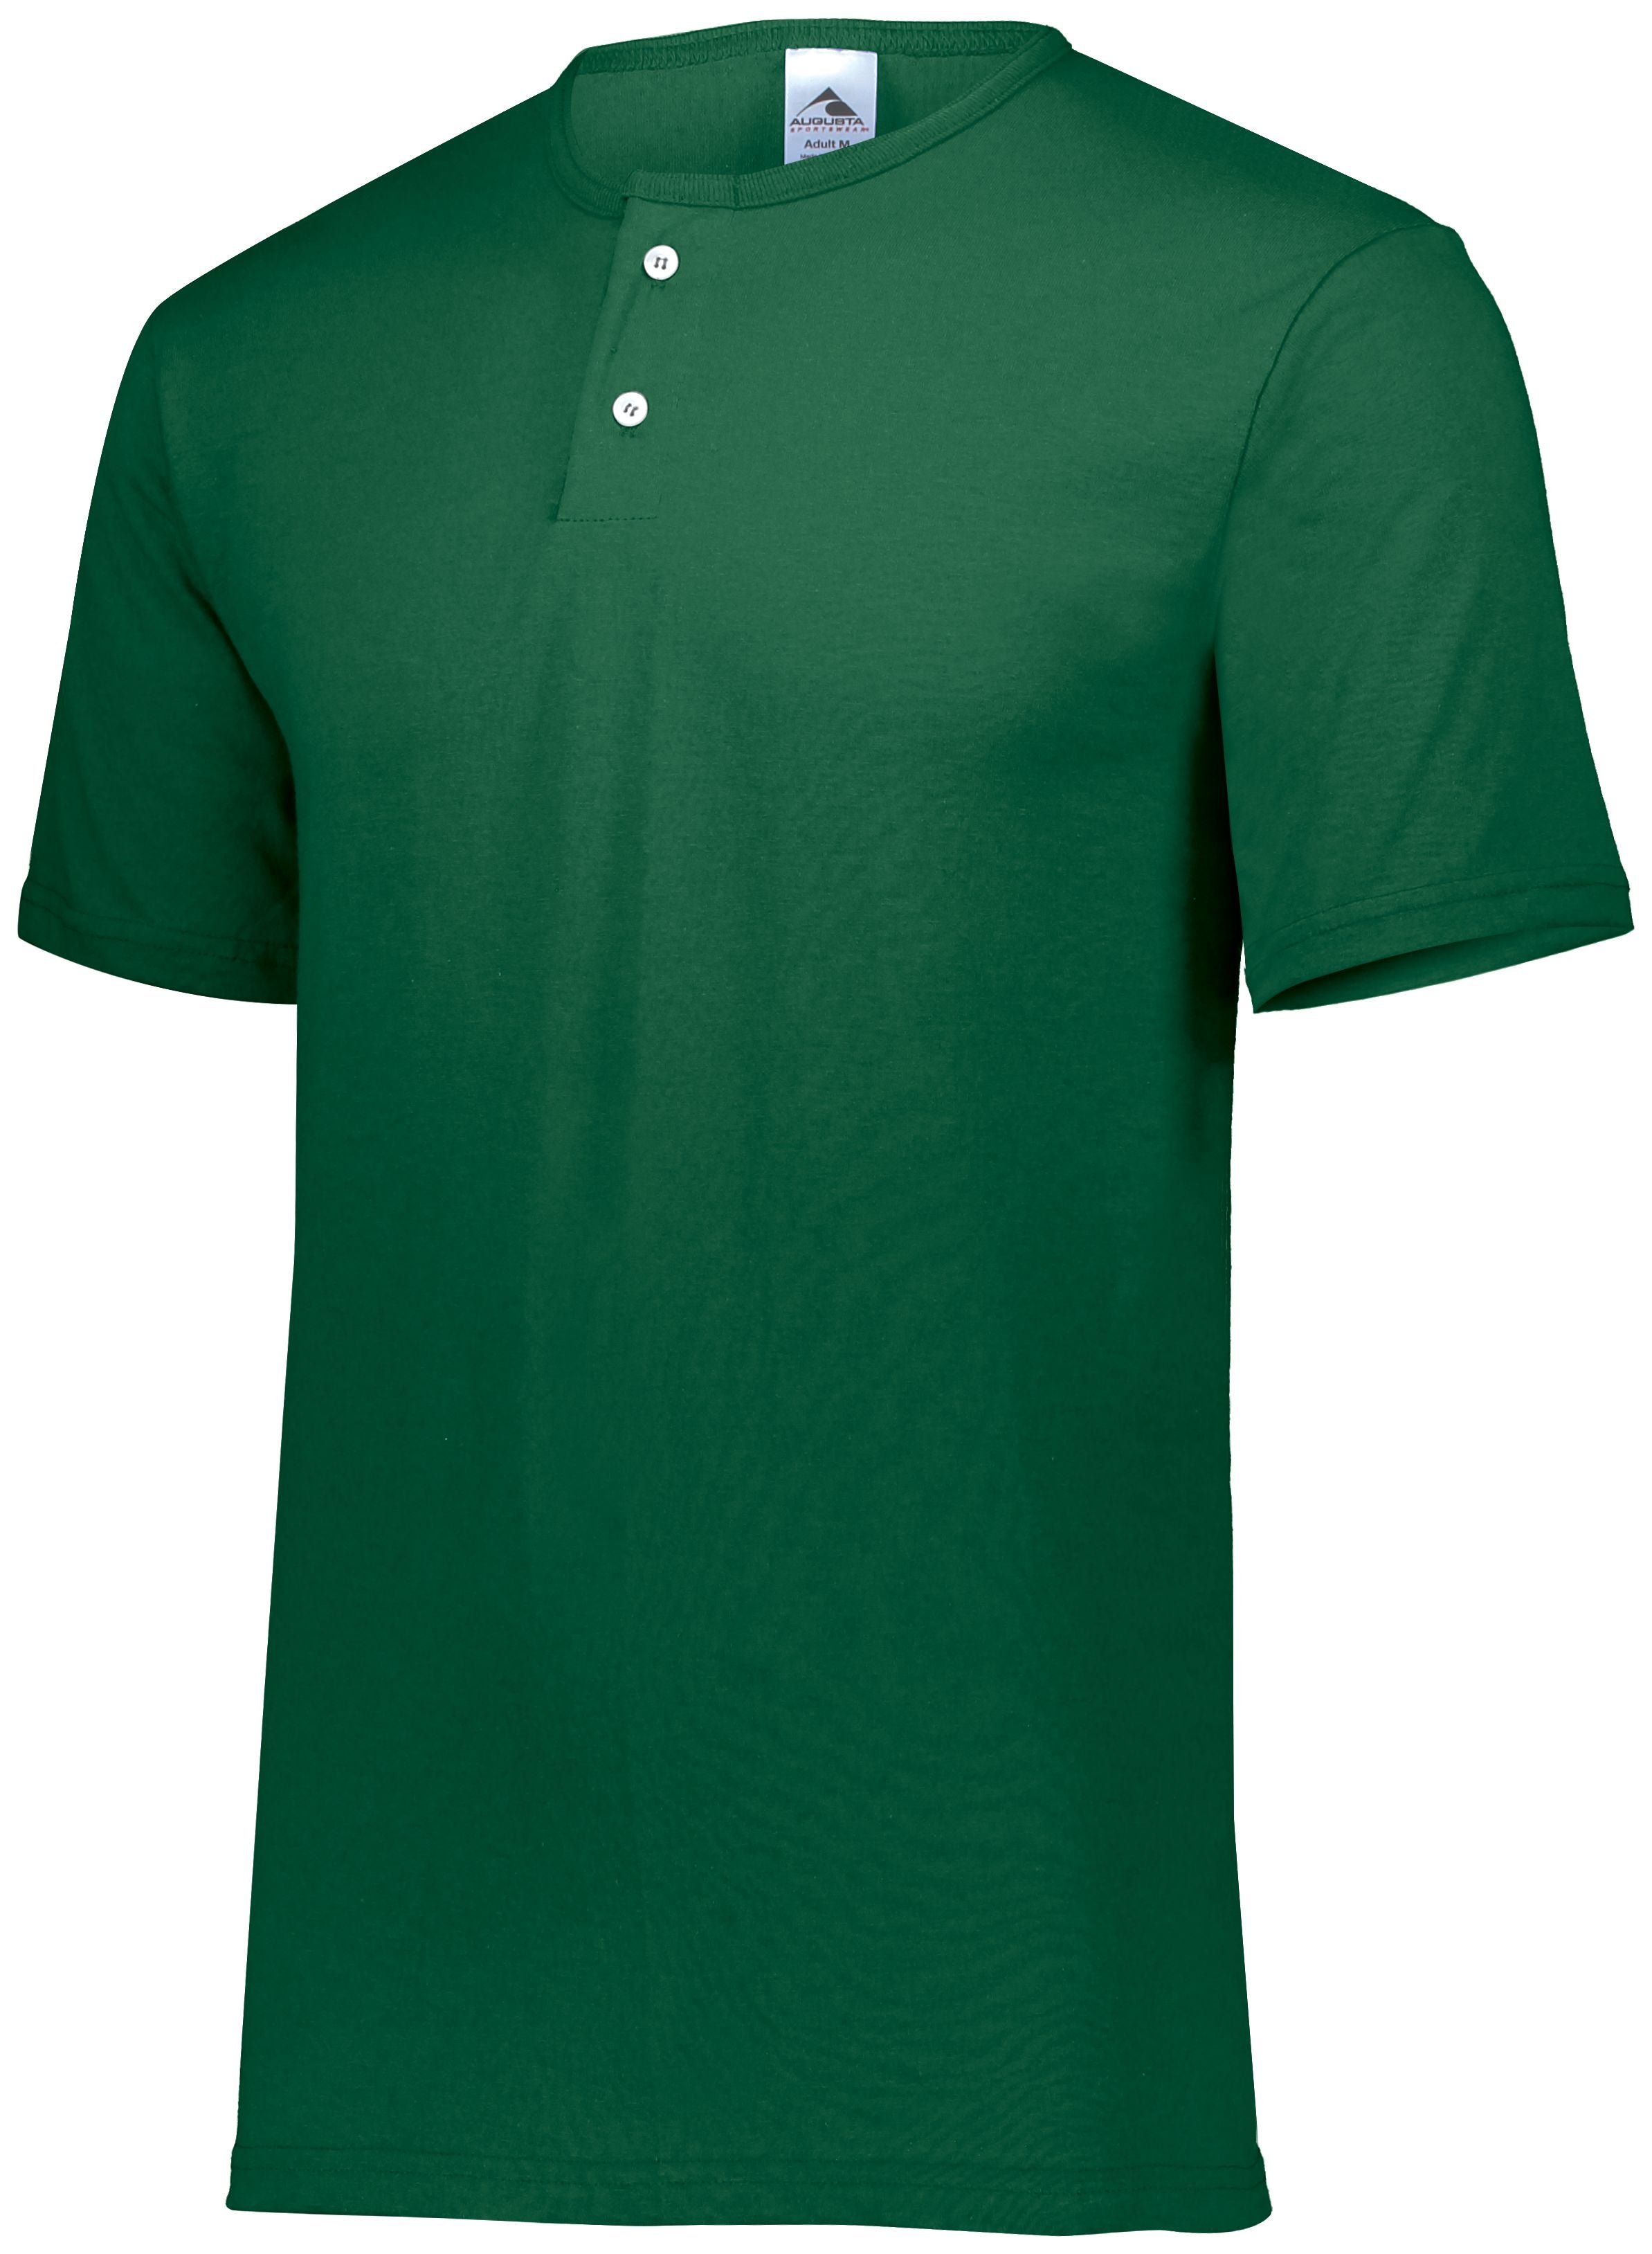 Augusta Sportswear Two-Button Baseball Jersey in Dark Green  -Part of the Adult, Adult-Jersey, Augusta-Products, Baseball, Shirts, All-Sports, All-Sports-1 product lines at KanaleyCreations.com